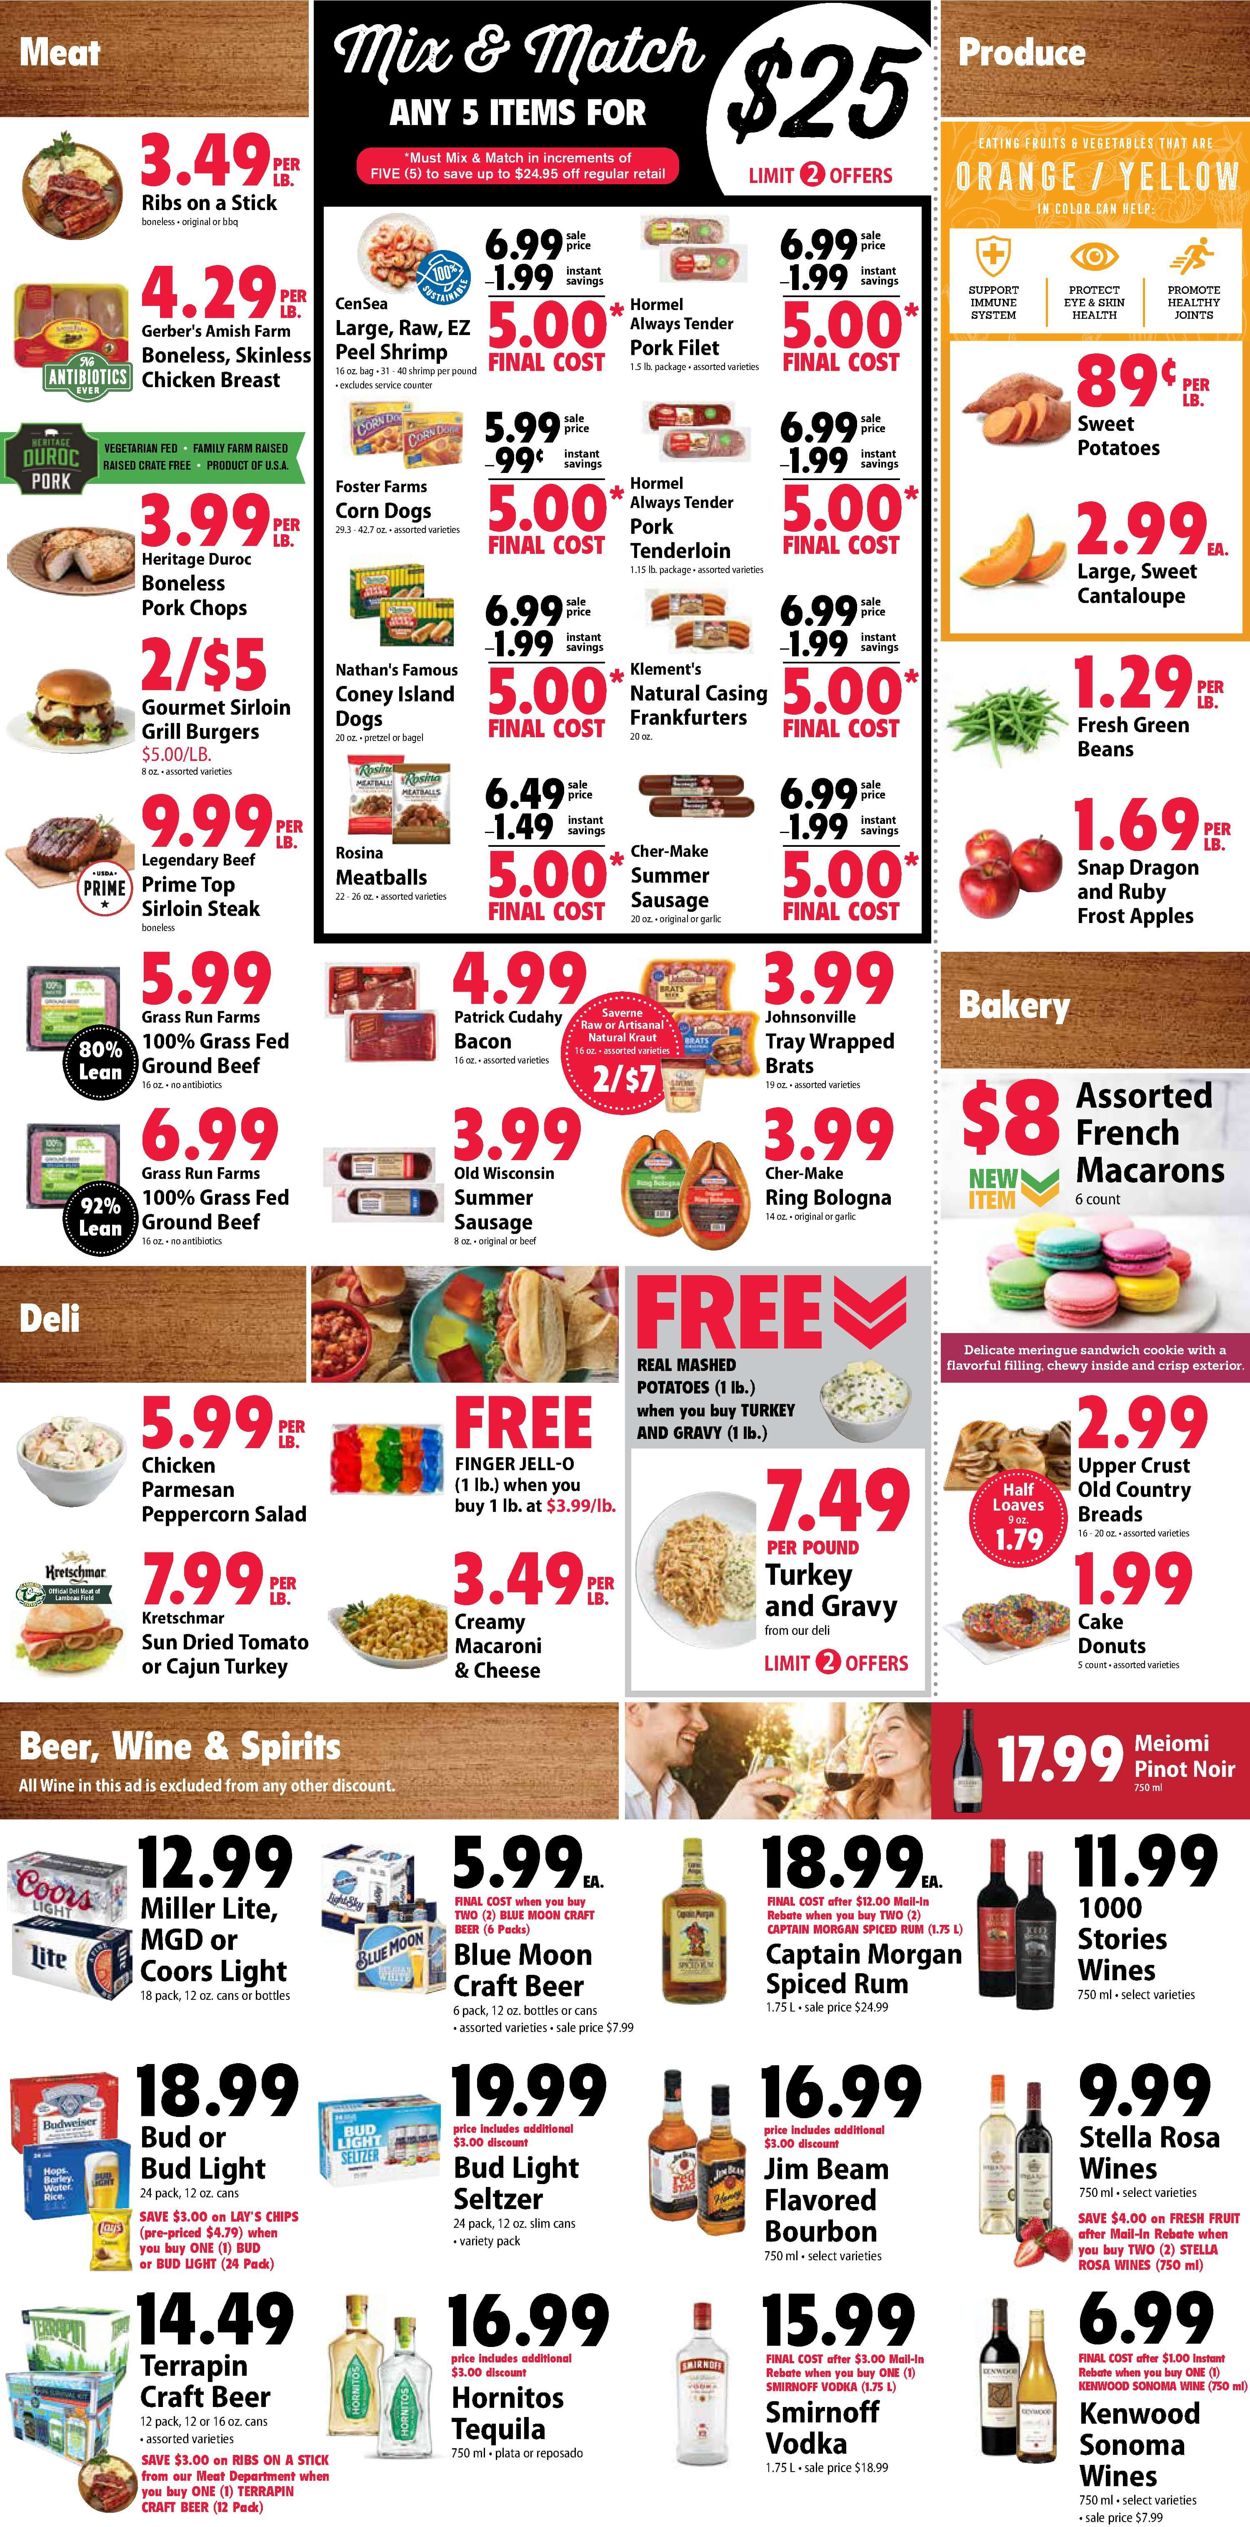 Festival Foods Current weekly ad 04/14 - 04/20/2021 [2] - frequent-ads.com